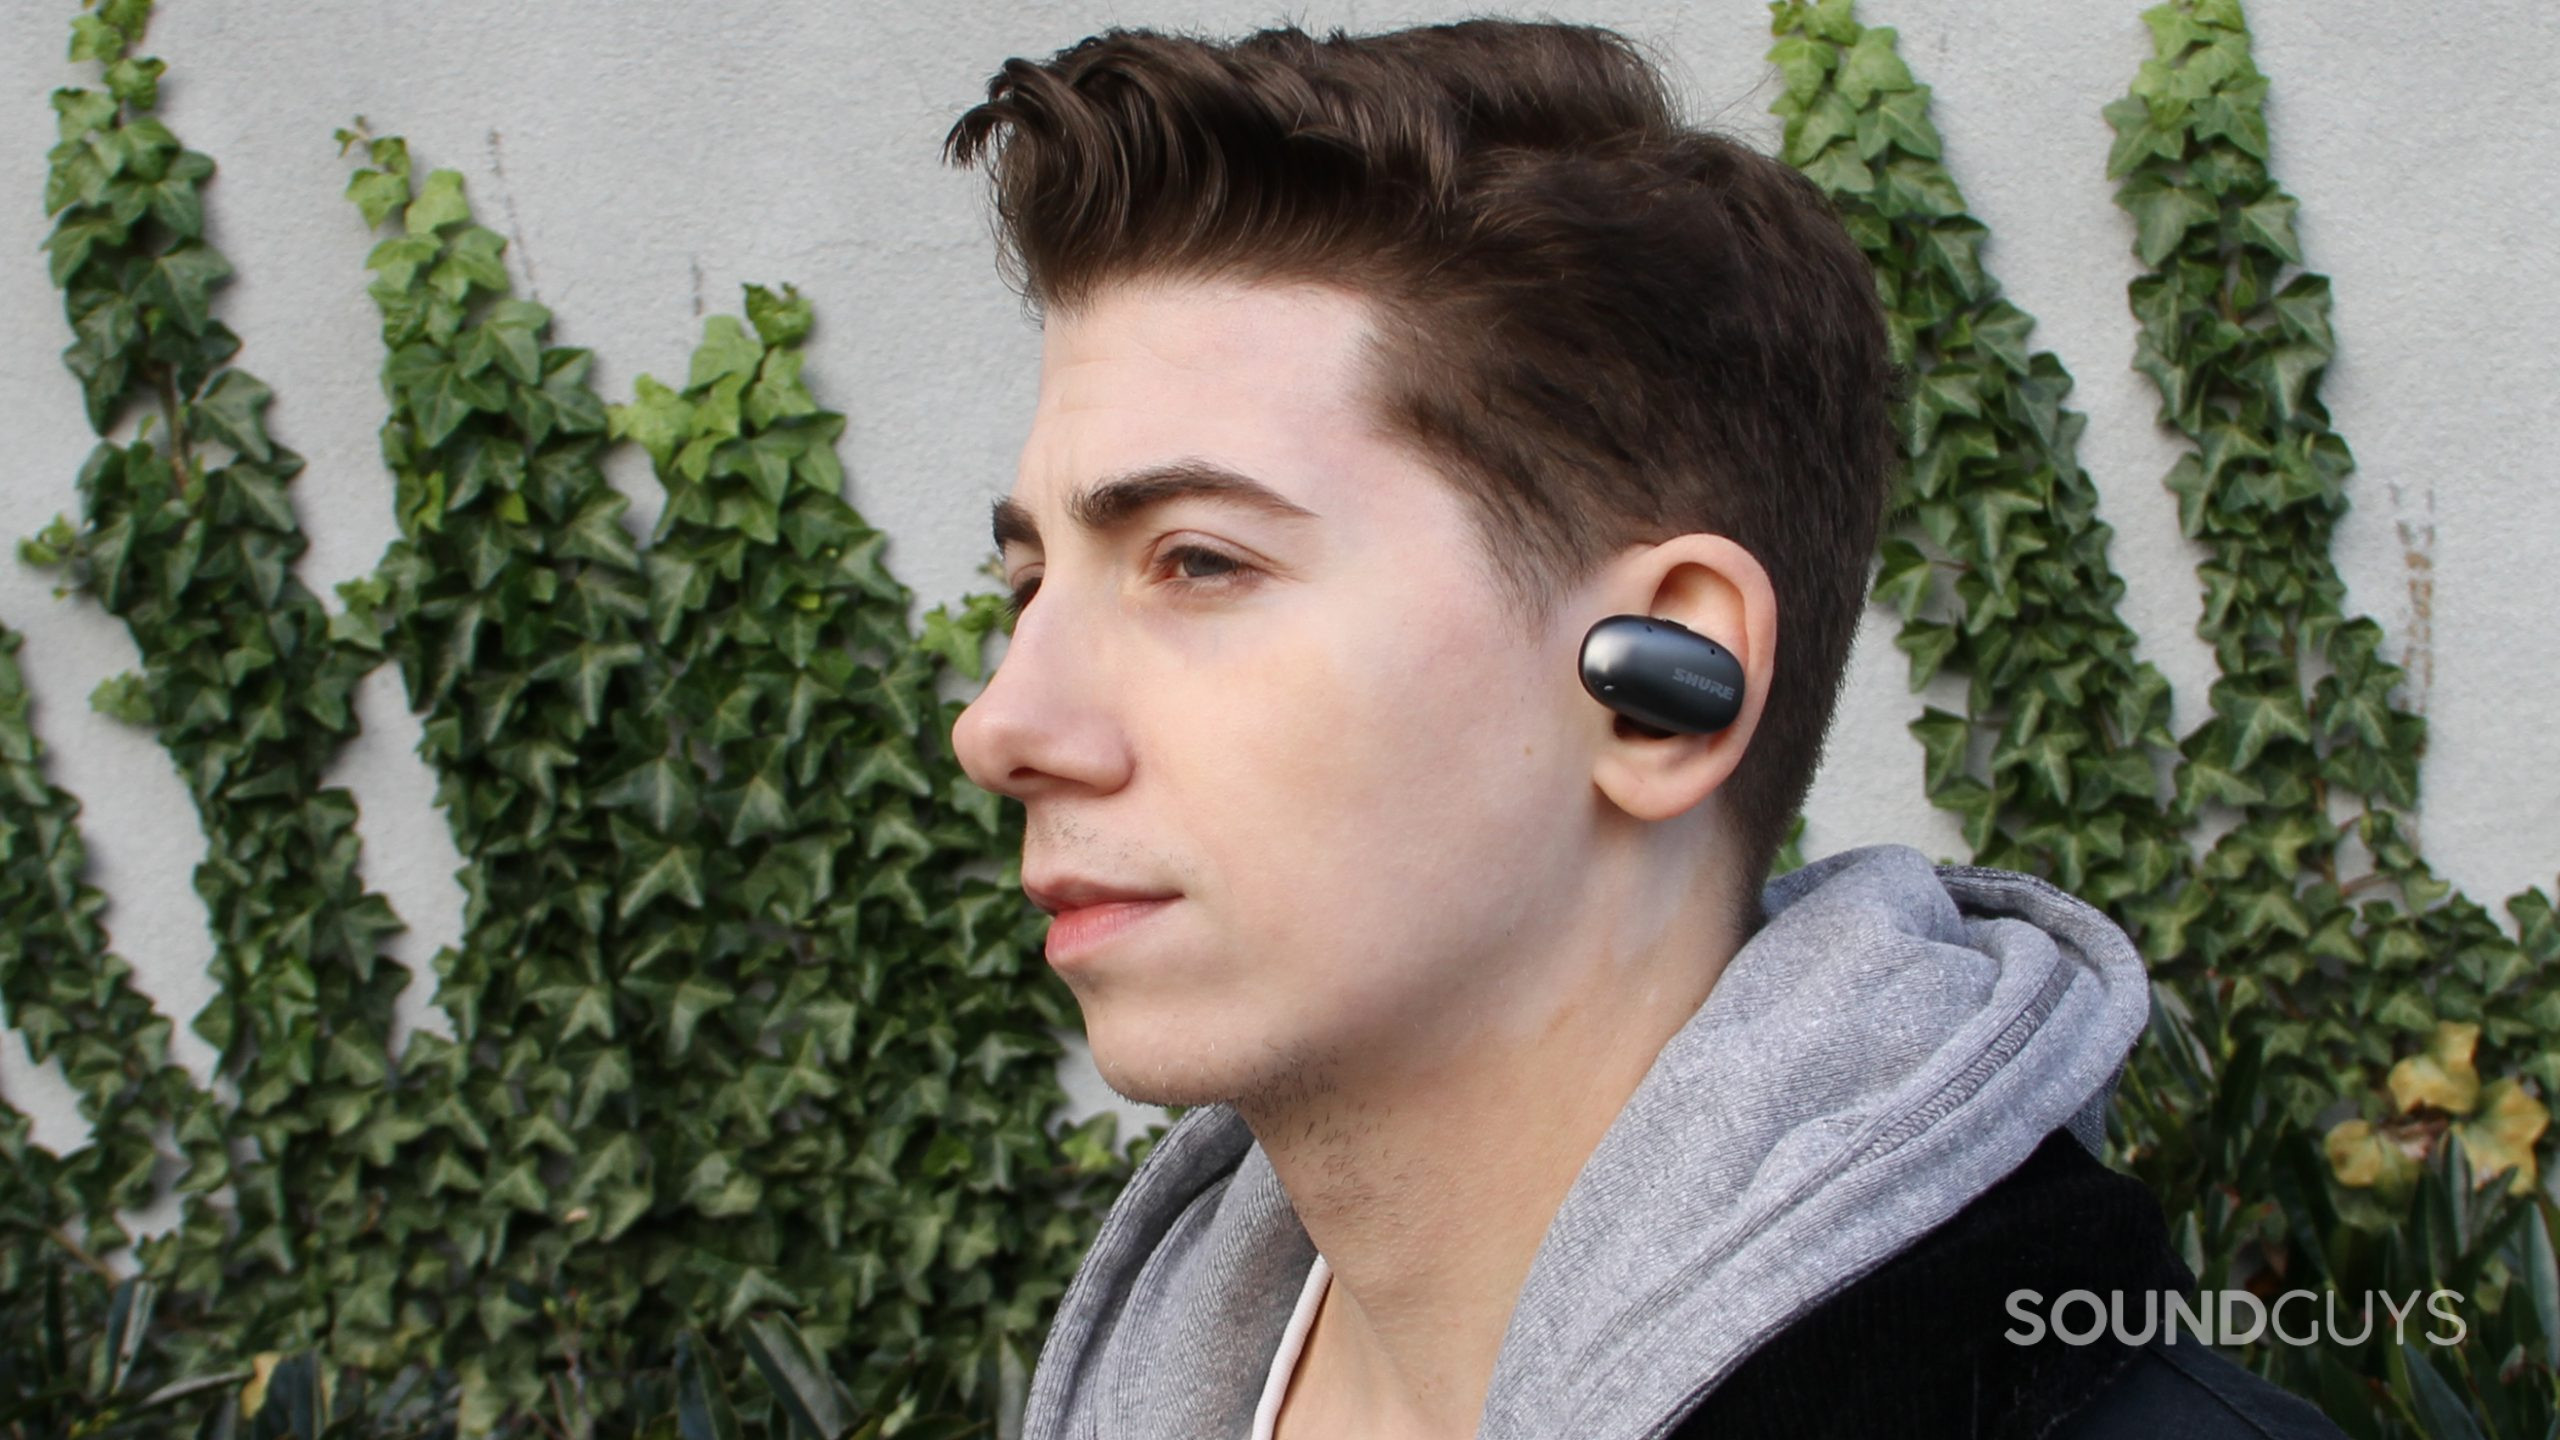 A man wears the Shure AONIC Free earbuds looking left with ivy in the background.